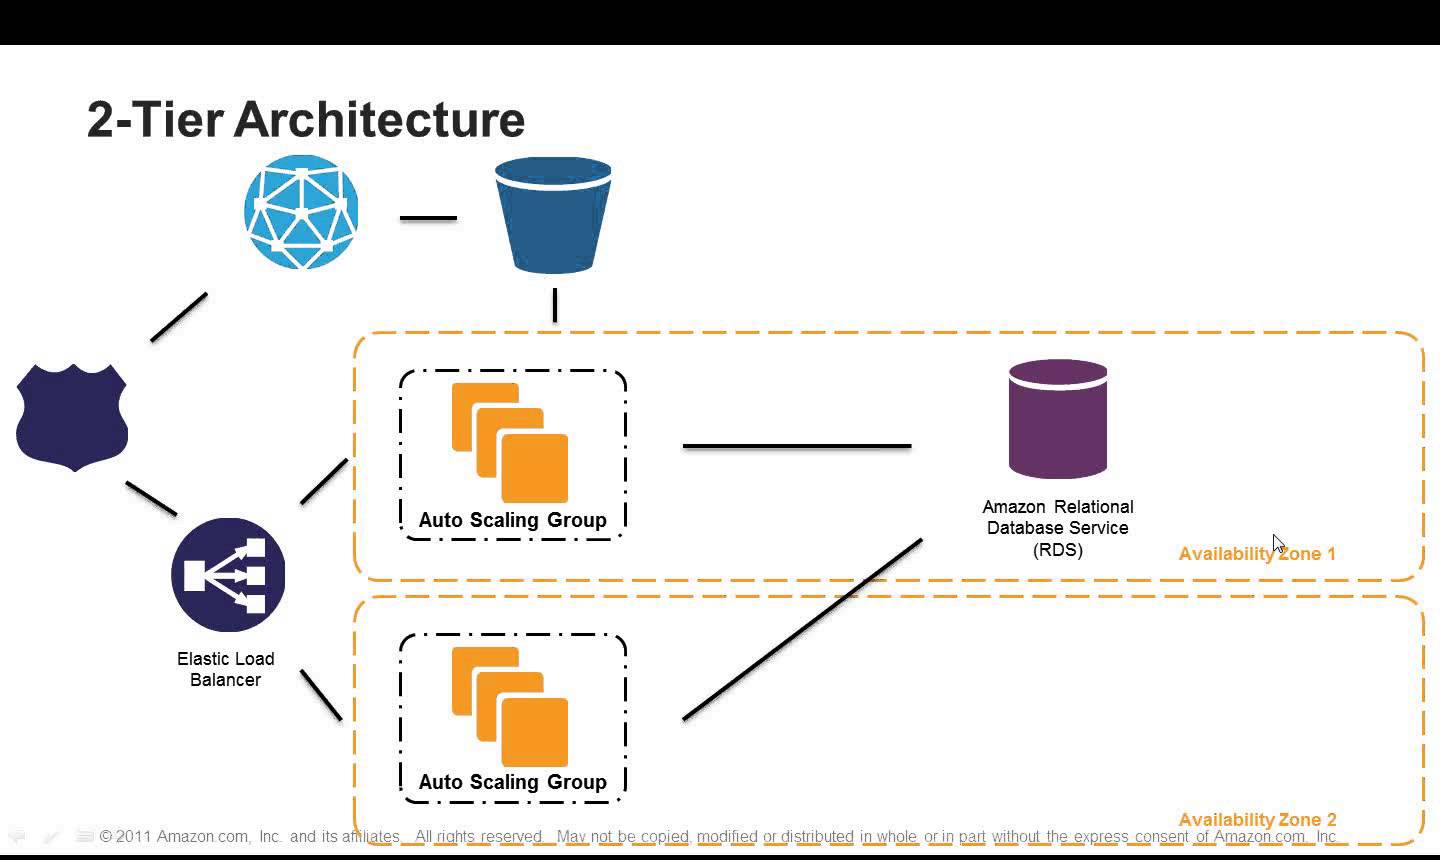 7 Steps to Select the Right AWS Cloud Architecture